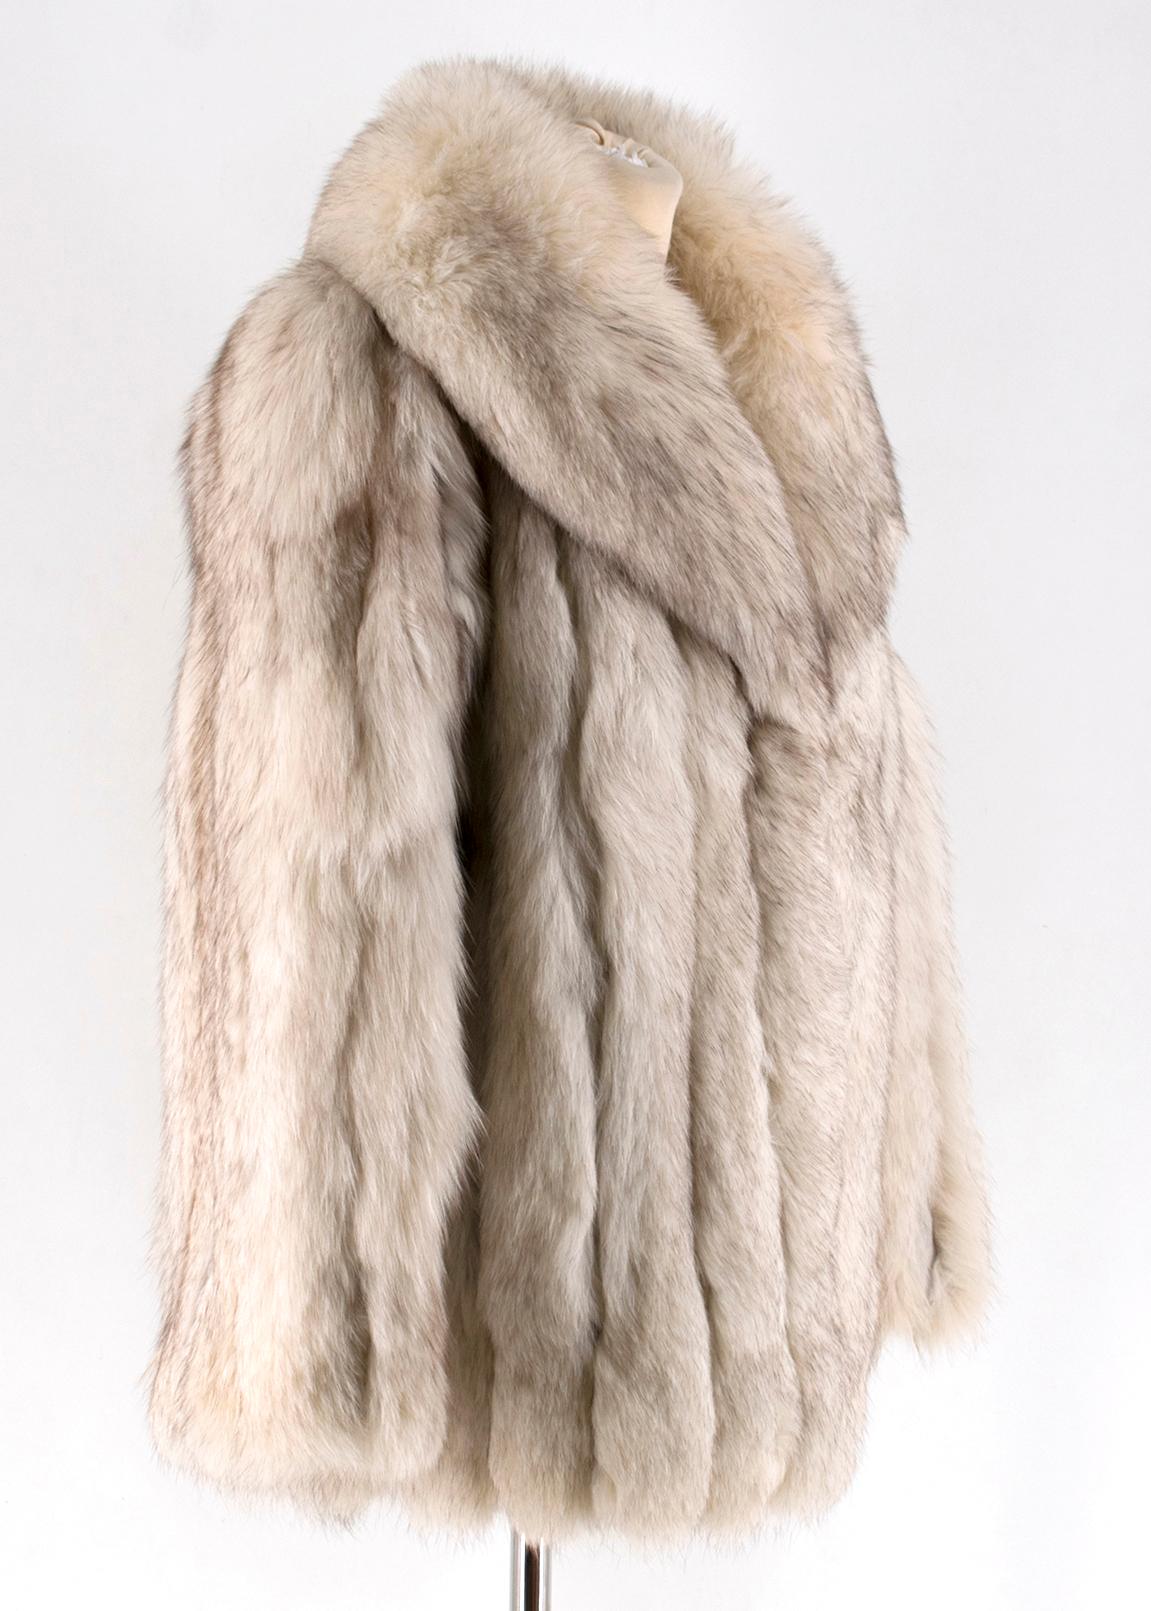 Saga Fox Platinum Fox Fur Coat 

Platinum fox fur coat 
Silk lining 
Suede detailing on sleeves
Long sleeved
Medium length
Hook fastening 

Please note, these items are pre-owned and may show some signs of storage, even when unworn and unused. This